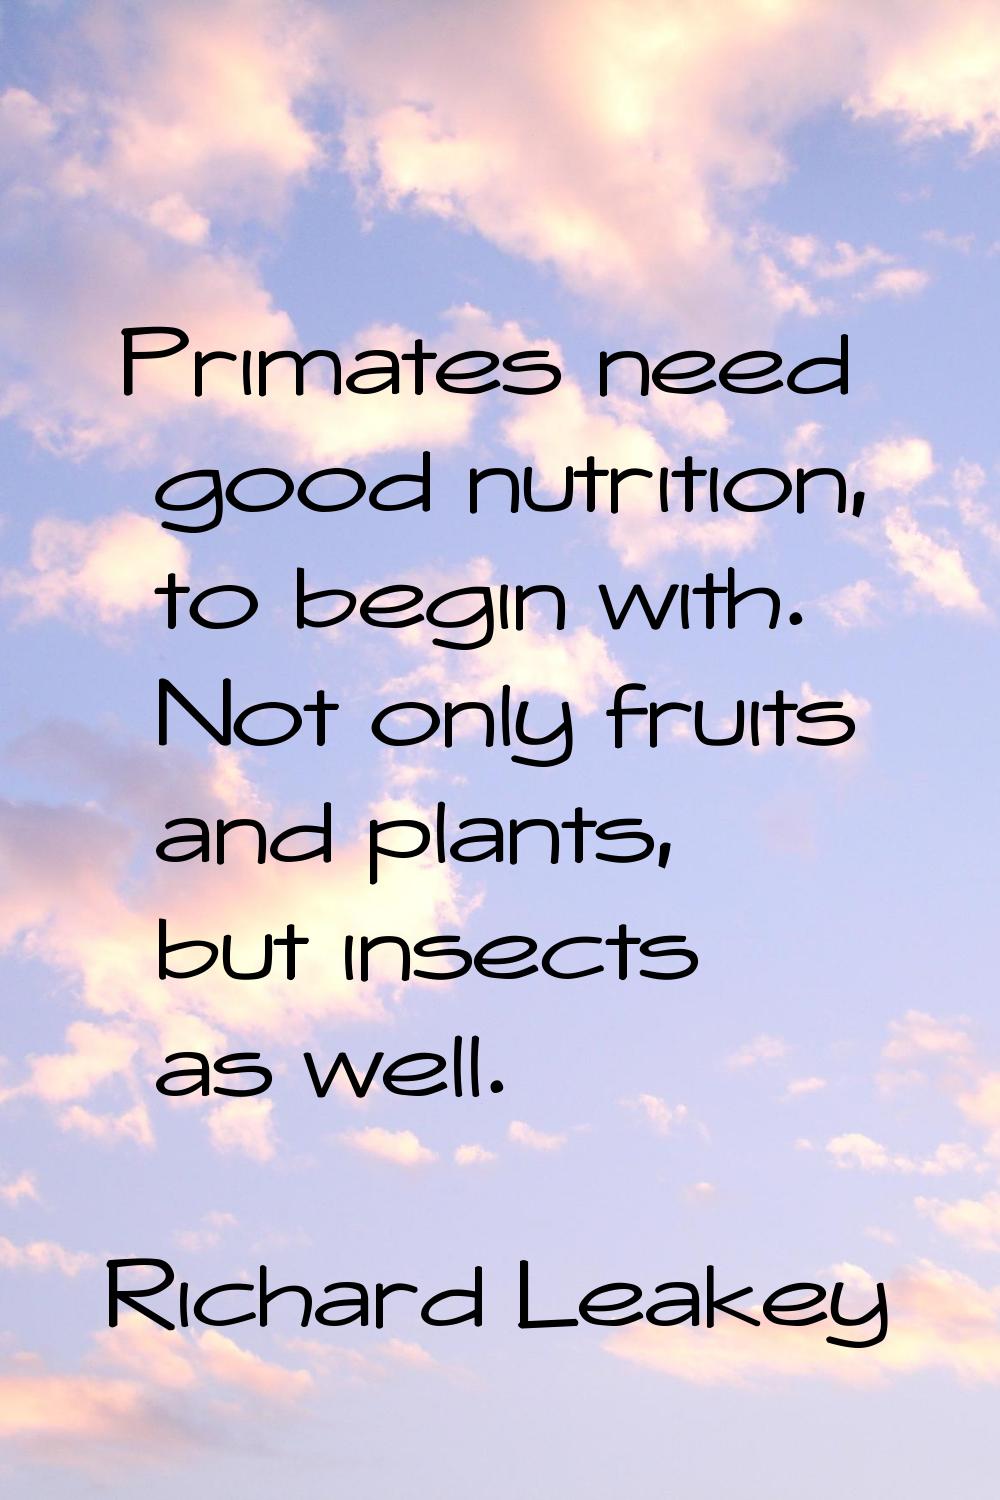 Primates need good nutrition, to begin with. Not only fruits and plants, but insects as well.